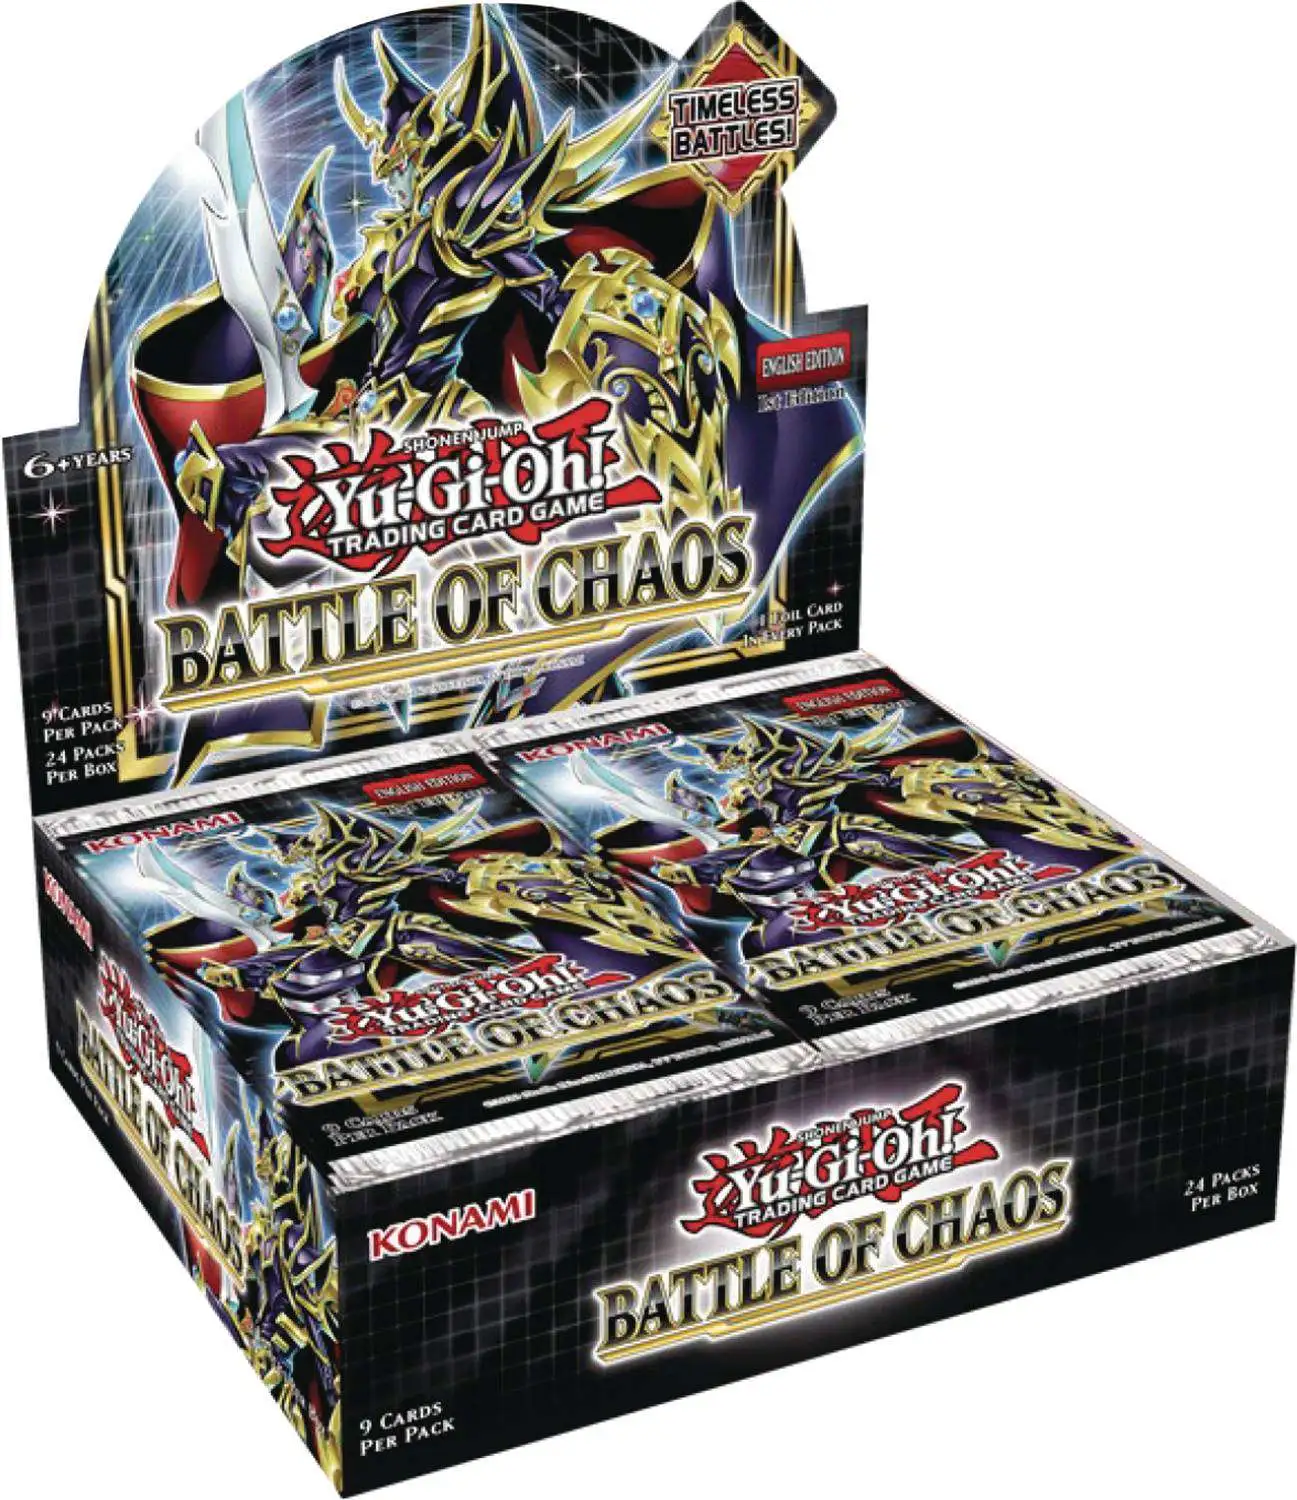 YuGiOh Trading Card Game Battle of Chaos Booster Box 24 Packs